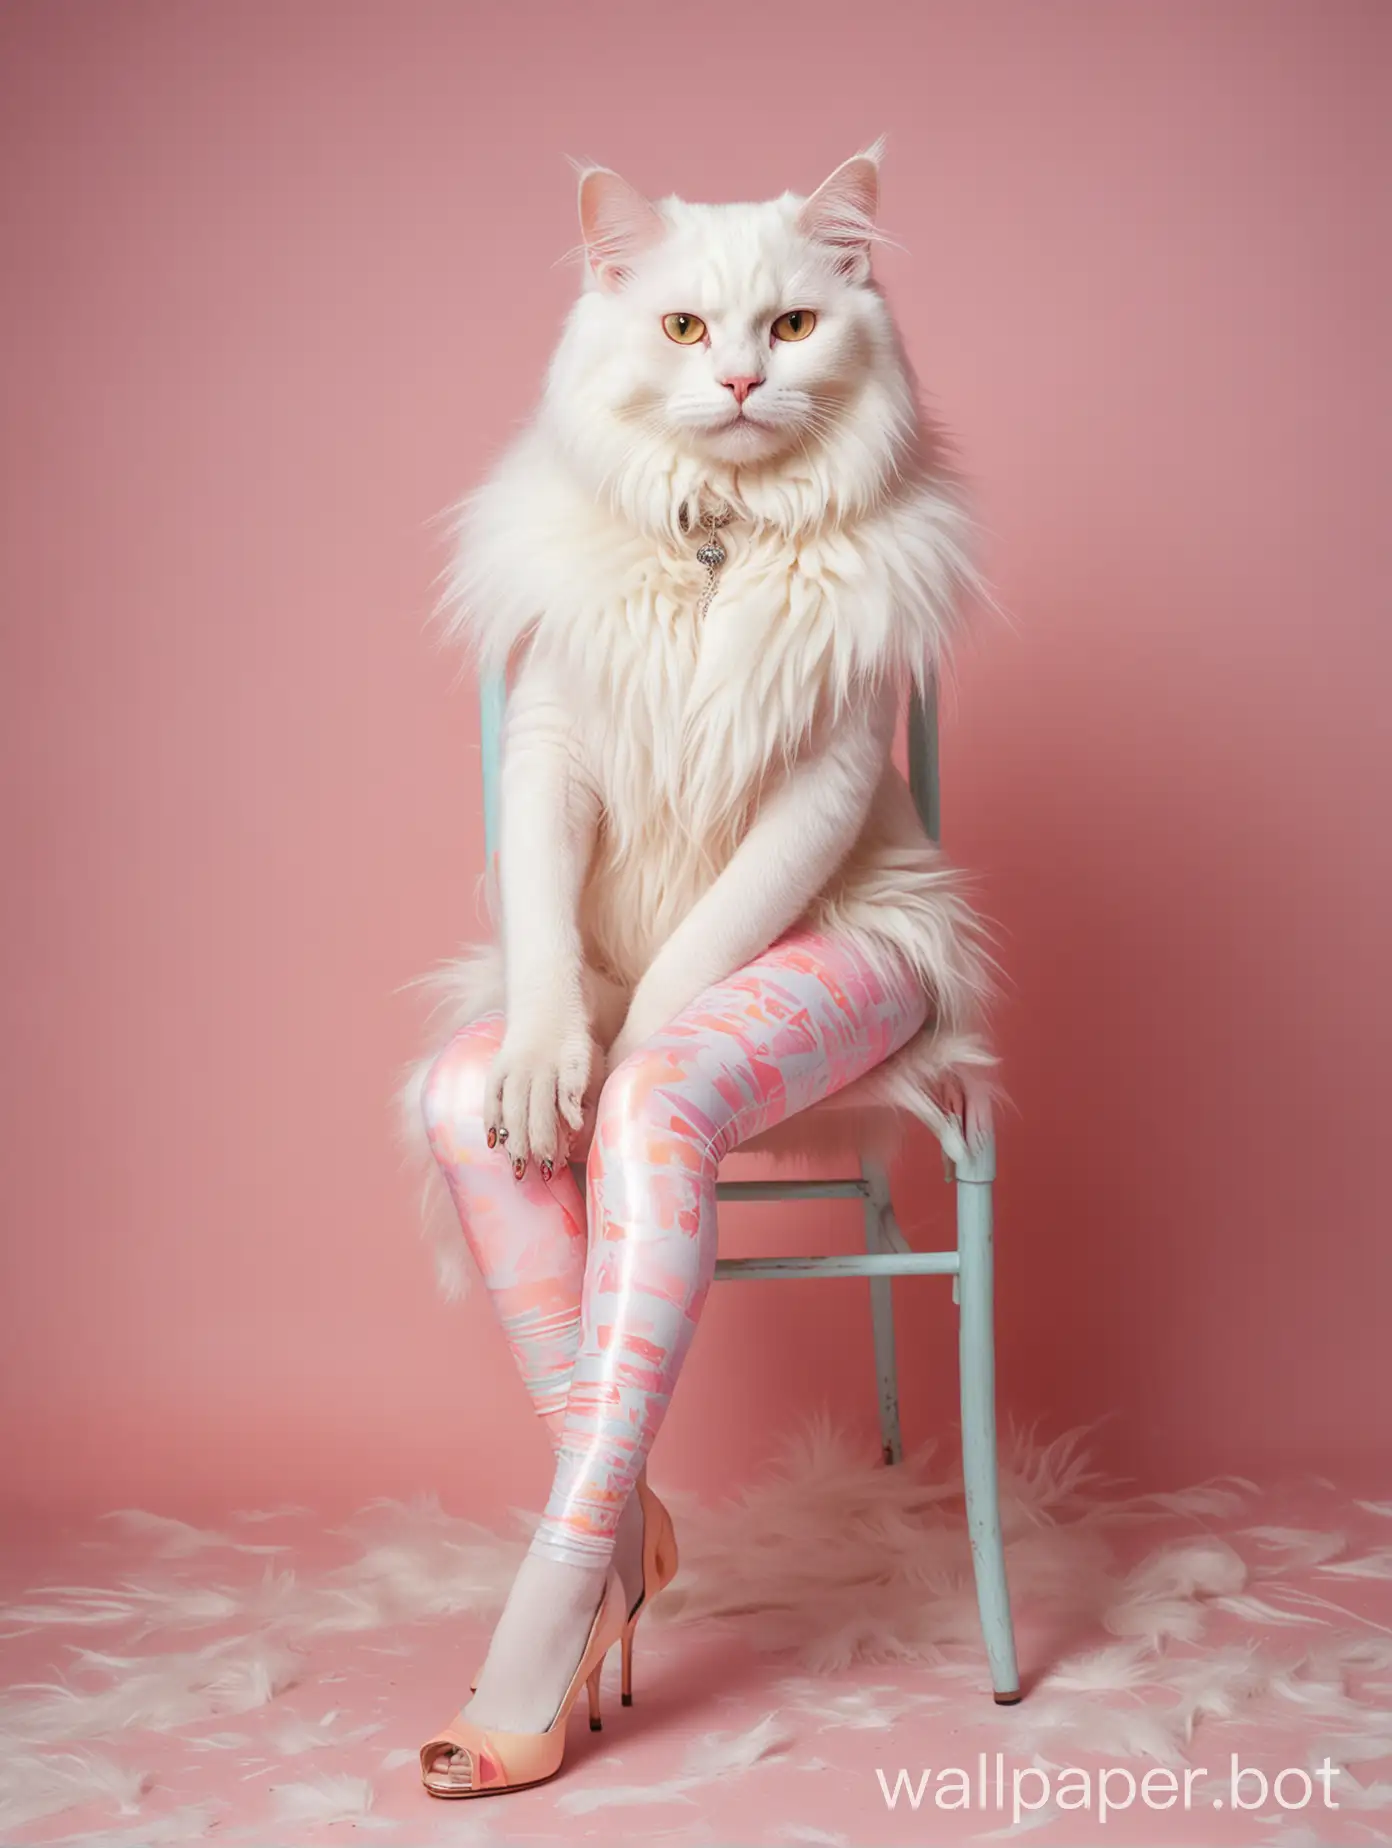 A full body photograph of an extremely beautiful and glamorous albino cat with long white fur, wearing pastel colored shiny leggings in the style of colorful neon drawings, sitting on a chair in front of a painted background, wearing high heels shoes, under soft studio lighting, with a dreamlike atmosphere, resembling fashion photography and cinematography.